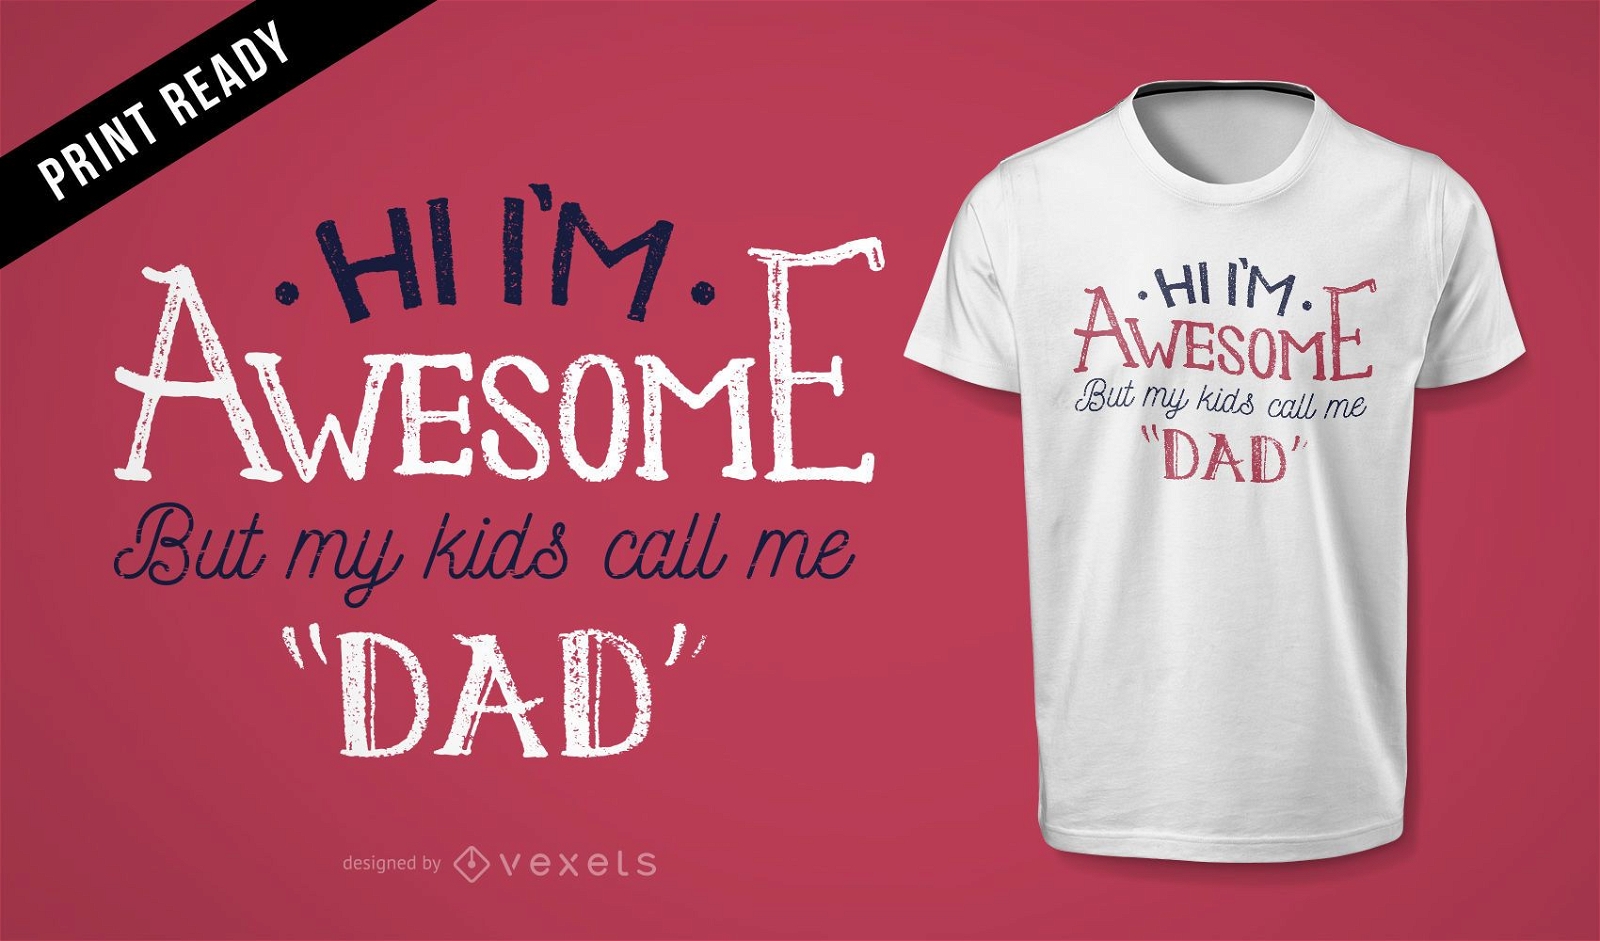 Awesome dad gift t-shirt design